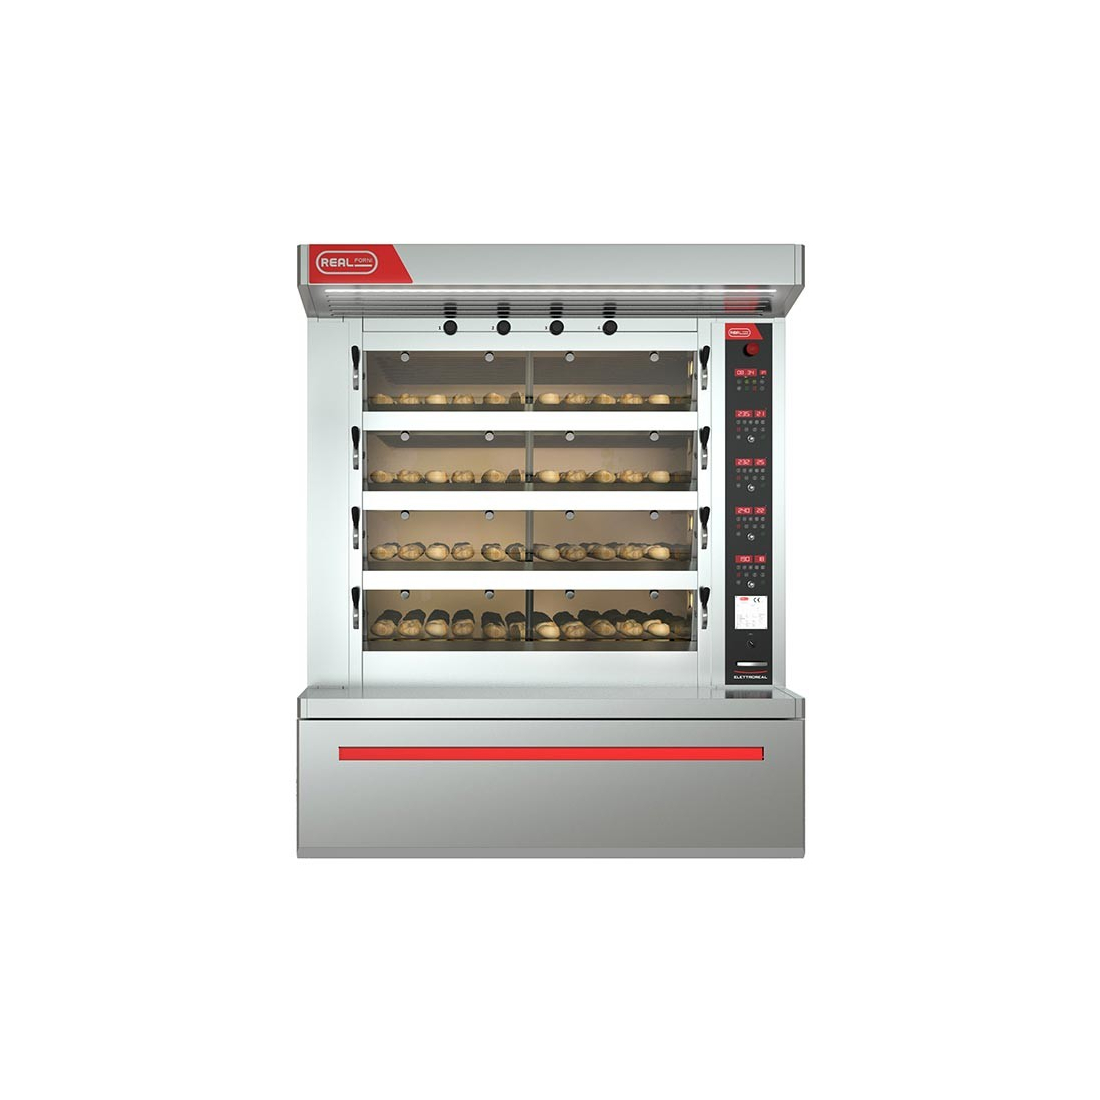 REAL FORNI (BE4C12.30) 4 DECK OVEN 48 trays 40*60 cm|mkayn|مكاين